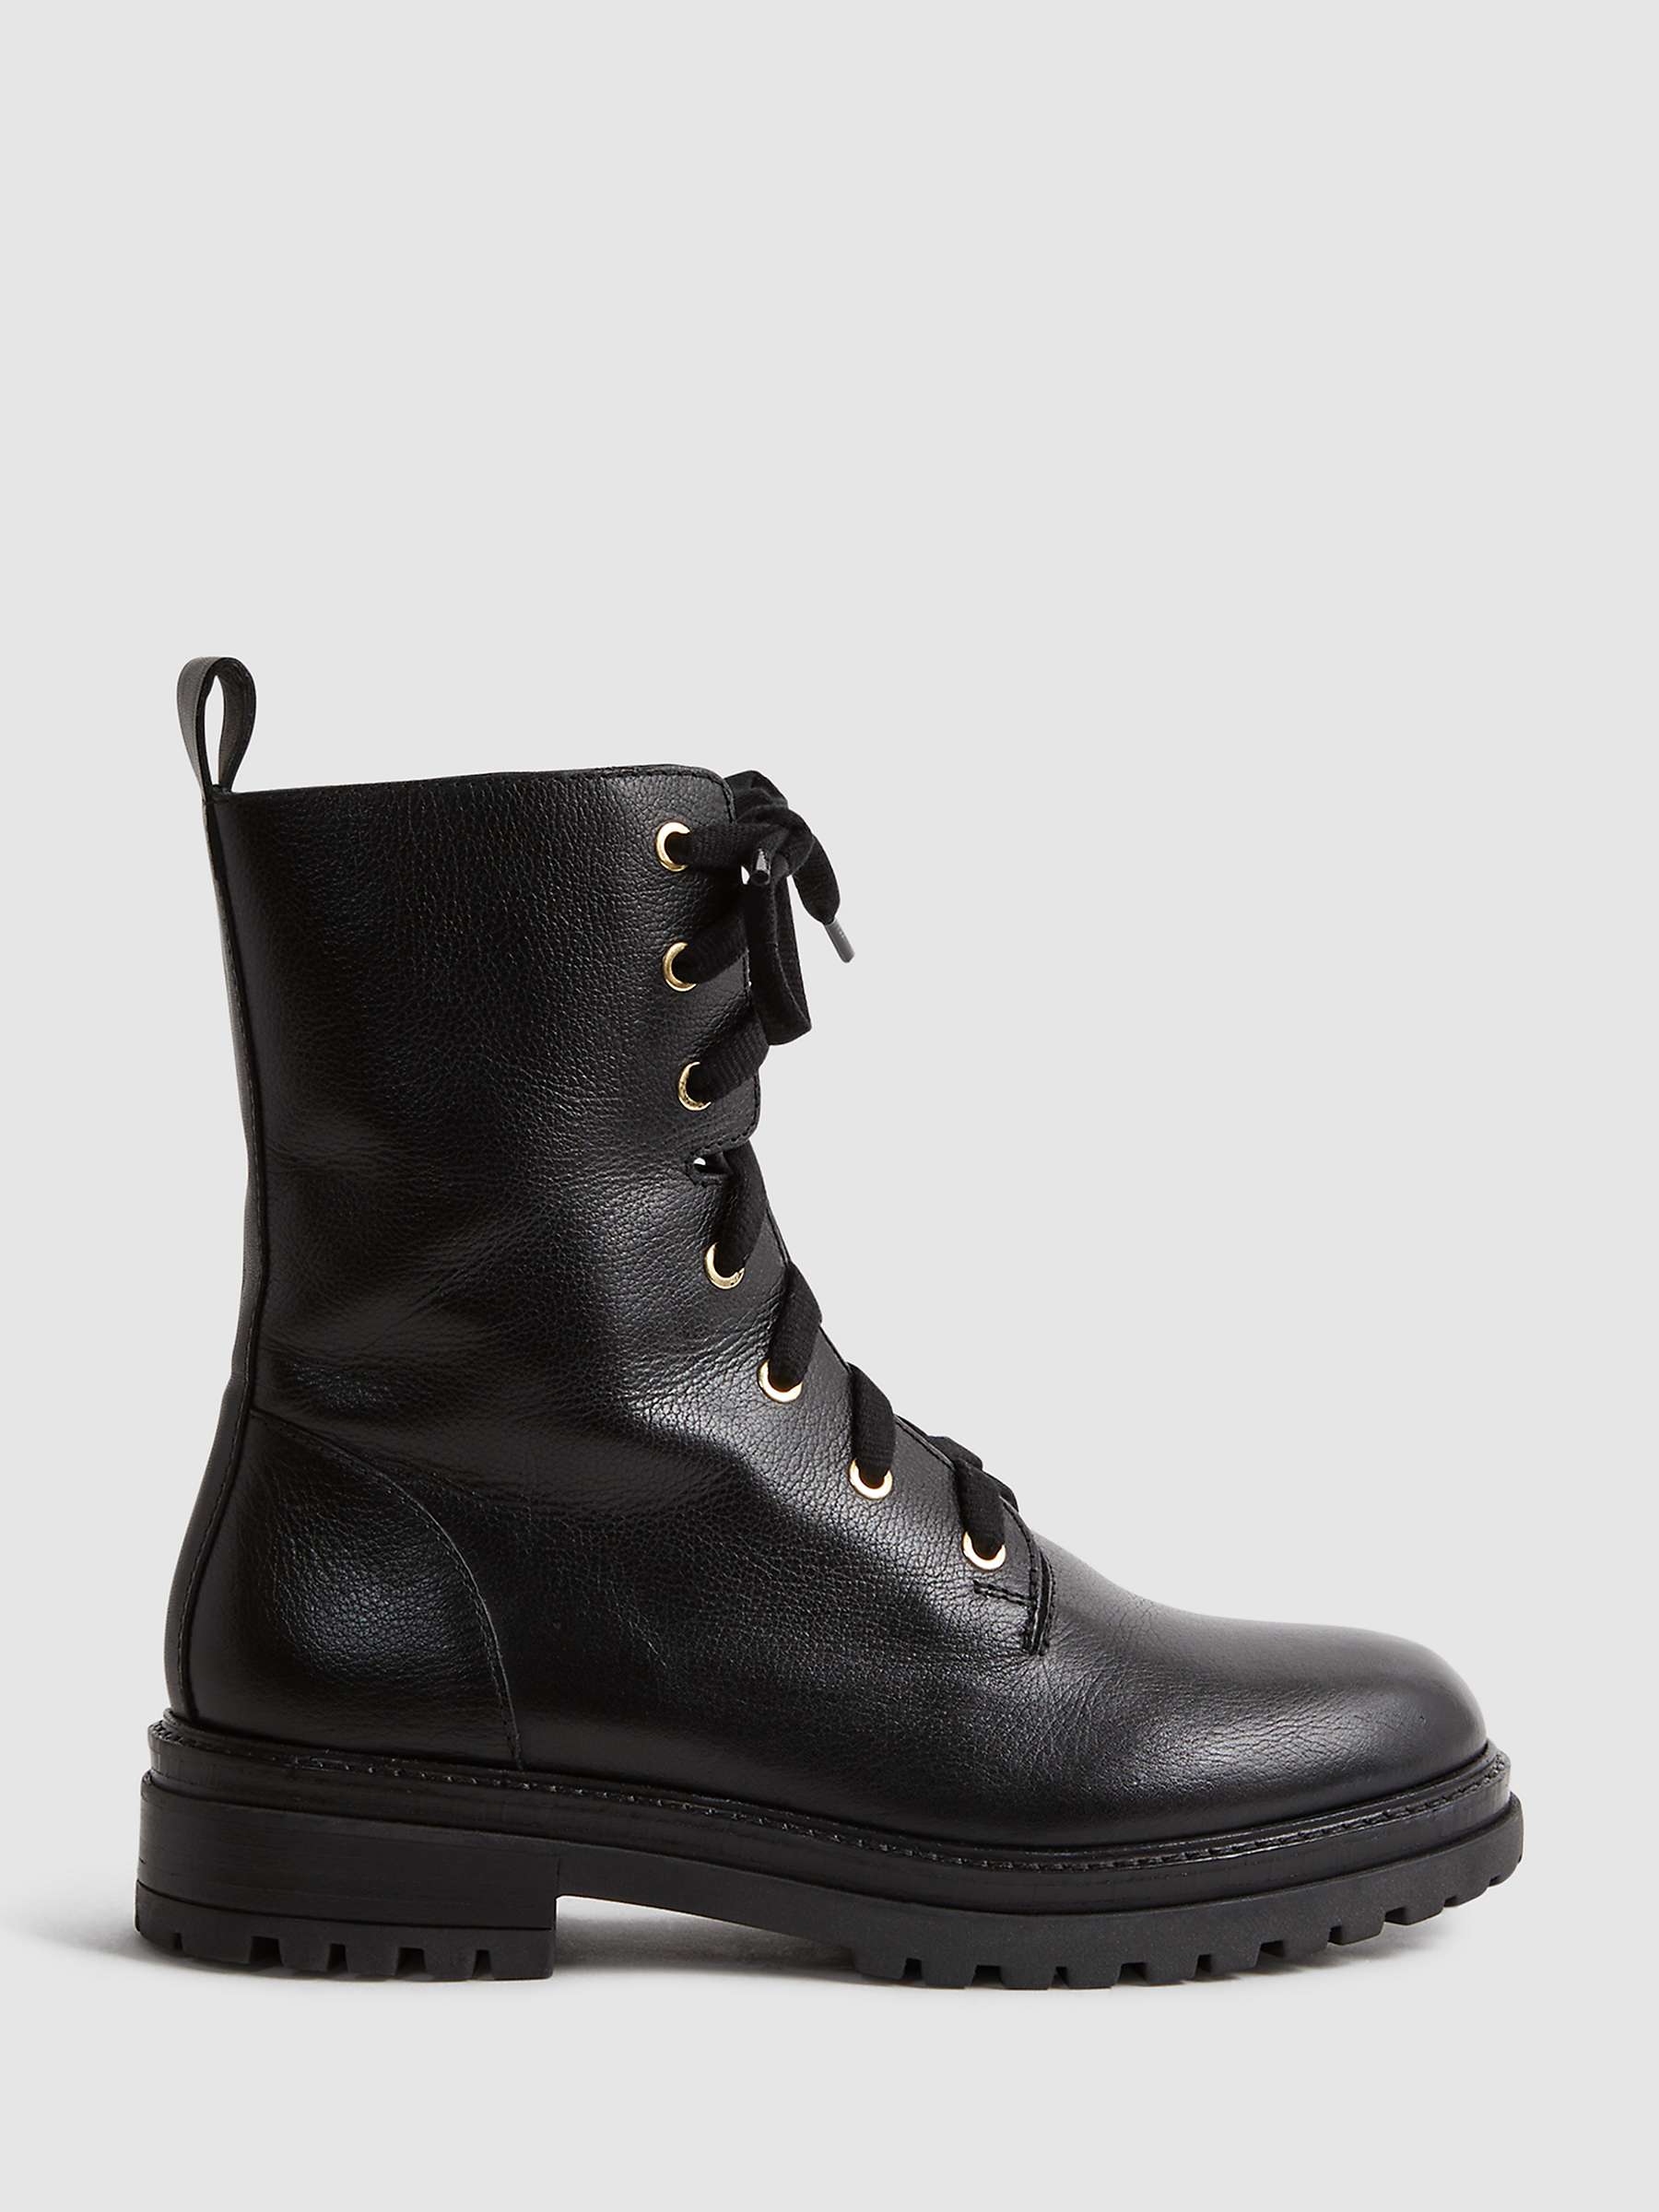 Buy Reiss Jenna Leather Lace Up Boots, Black Online at johnlewis.com